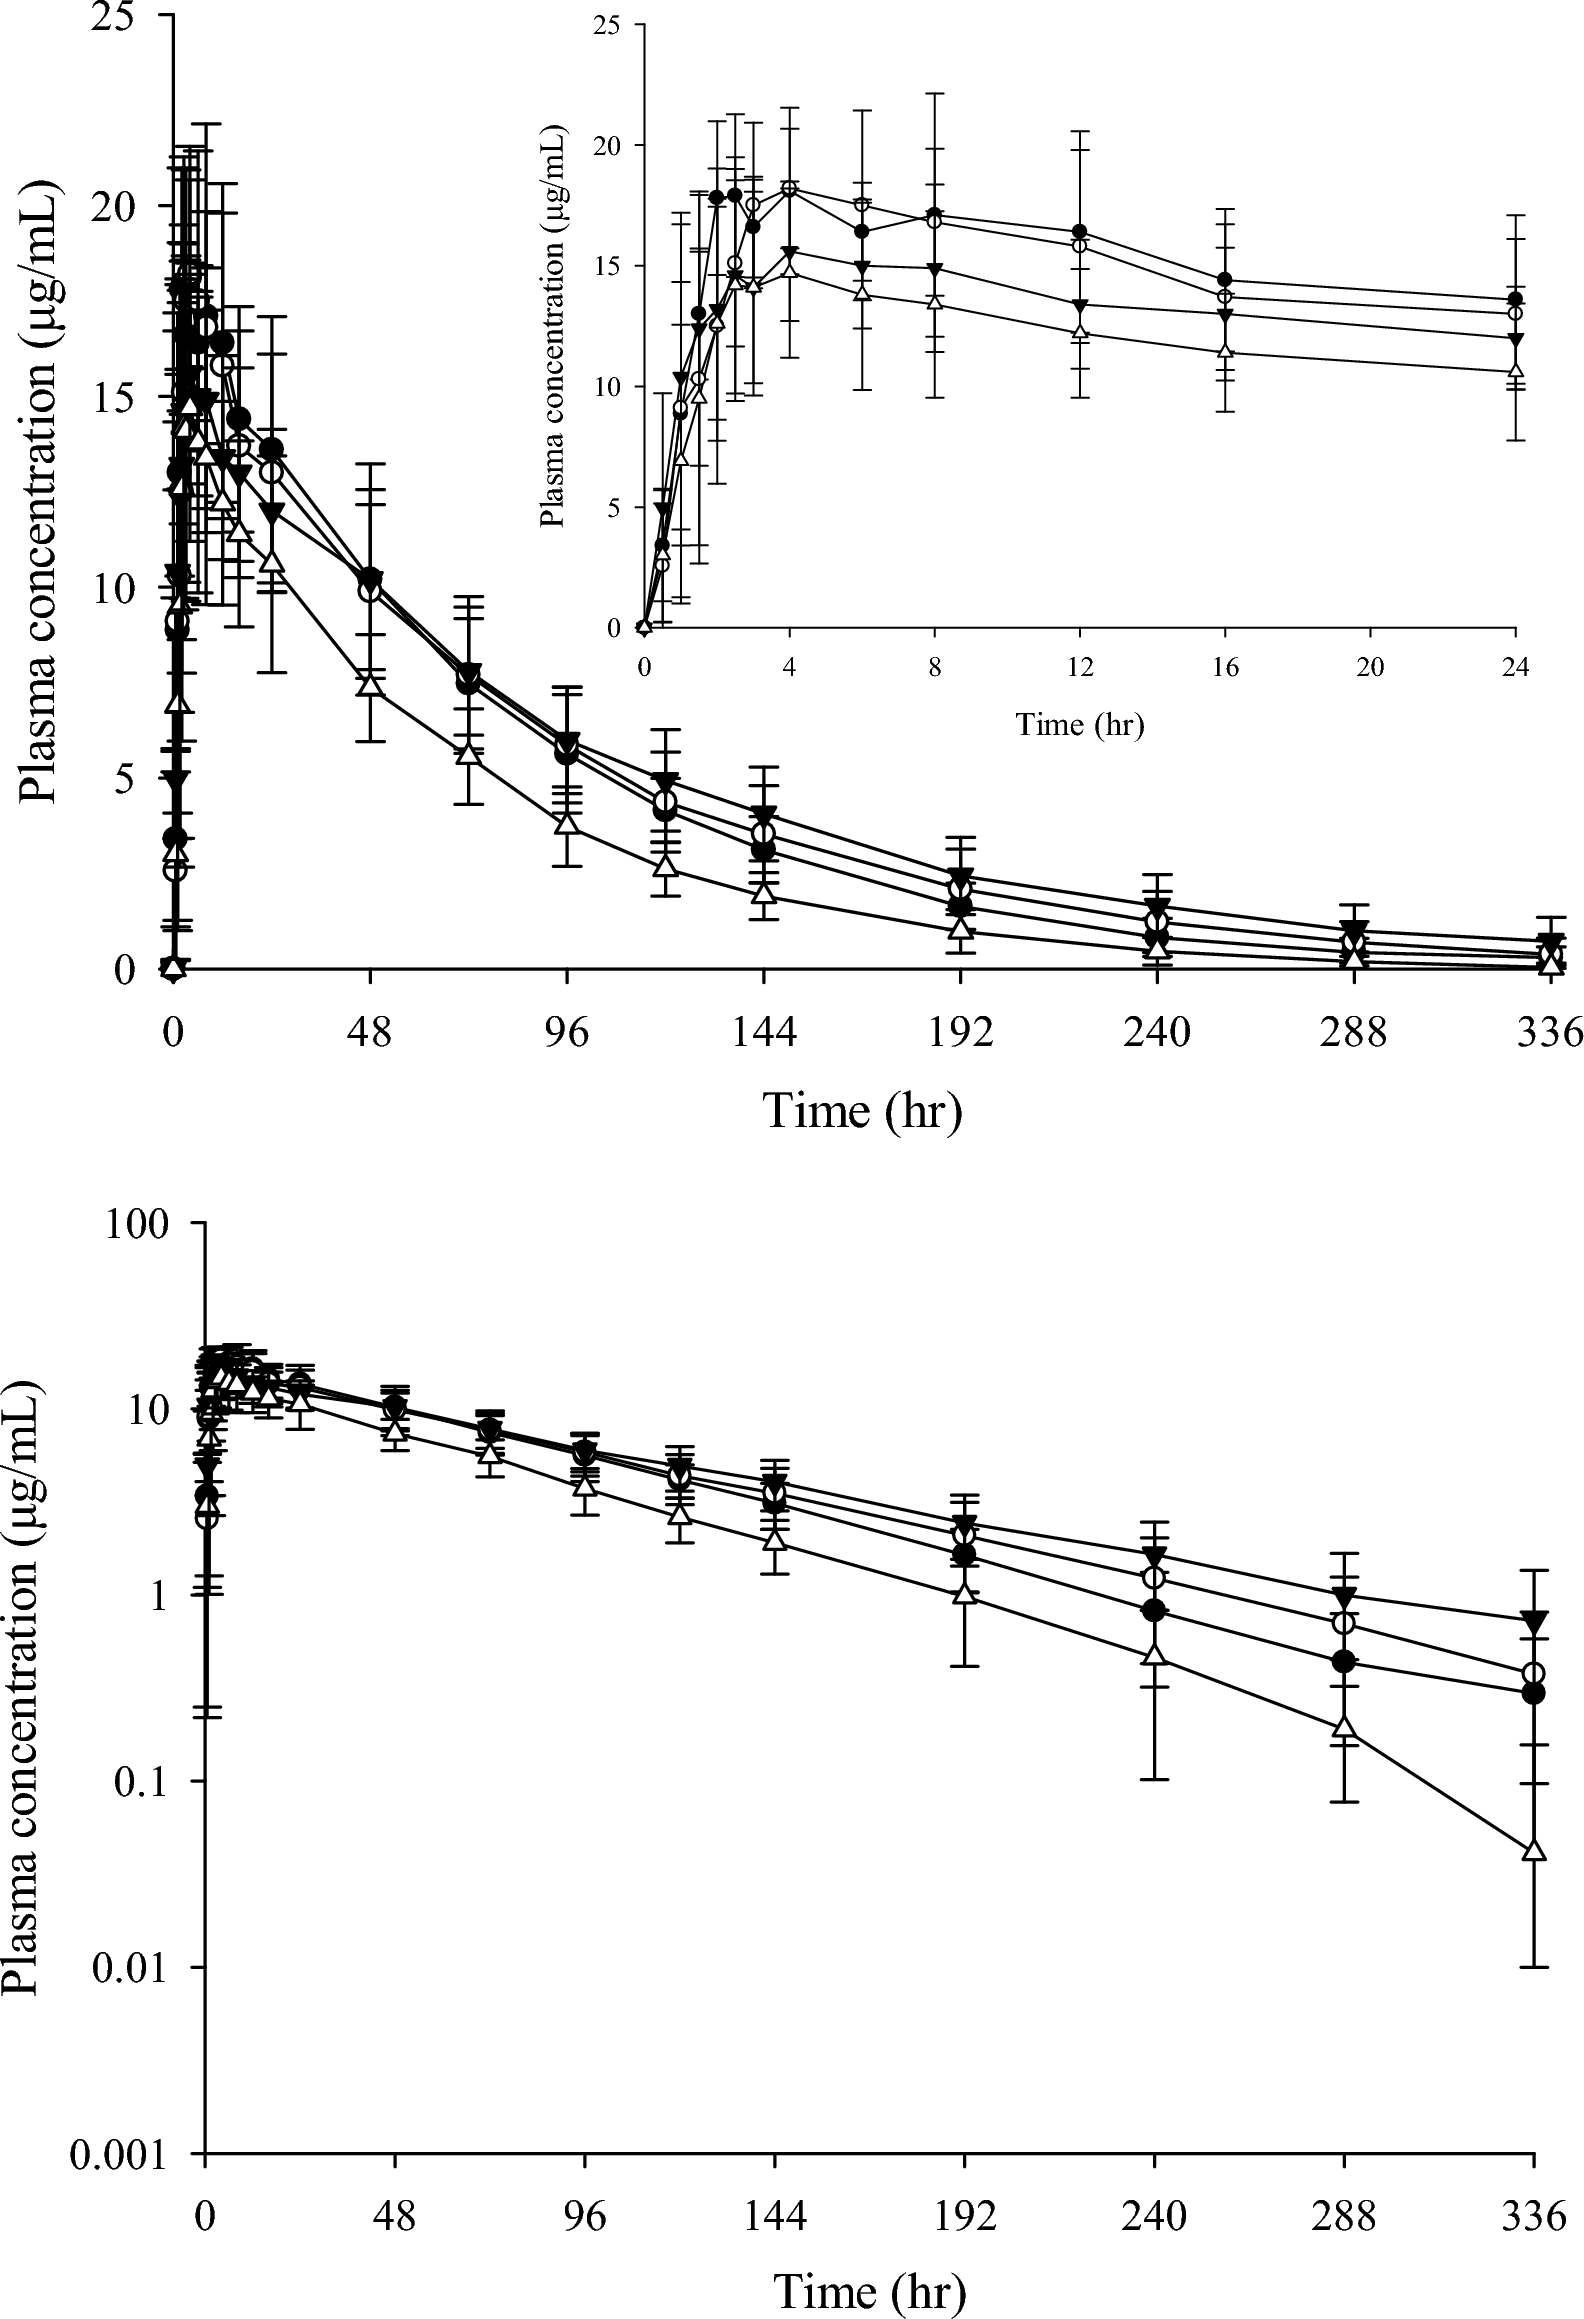 Effect of Renal Impairment on Pharmacokinetics and Safety of Ensitrelvir, a SARS-CoV-2 3CL Protease Inhibitor